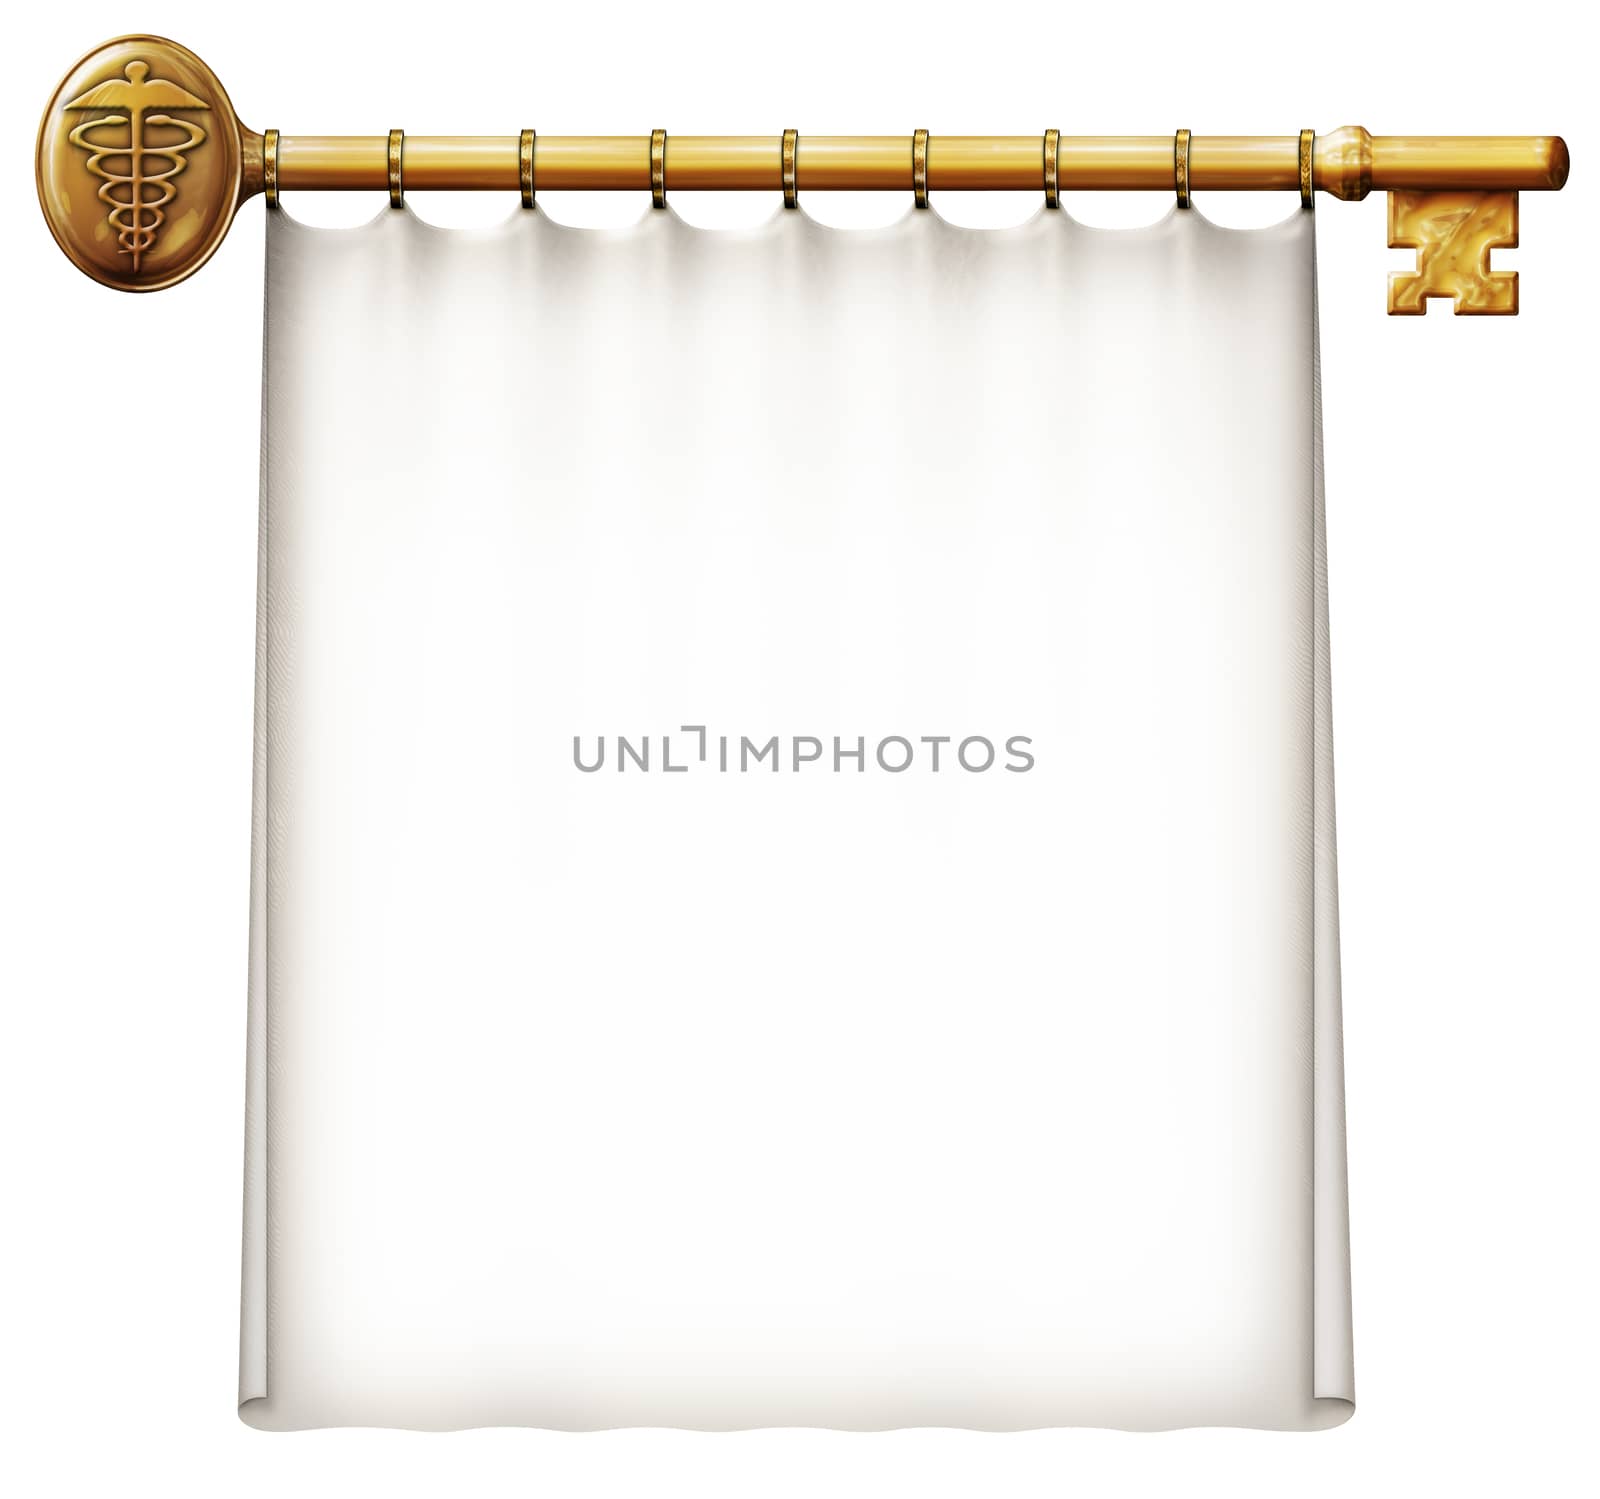 Photo Illustration of a banner hanging on a gold key with a Caduceus – the symbol for medicine.